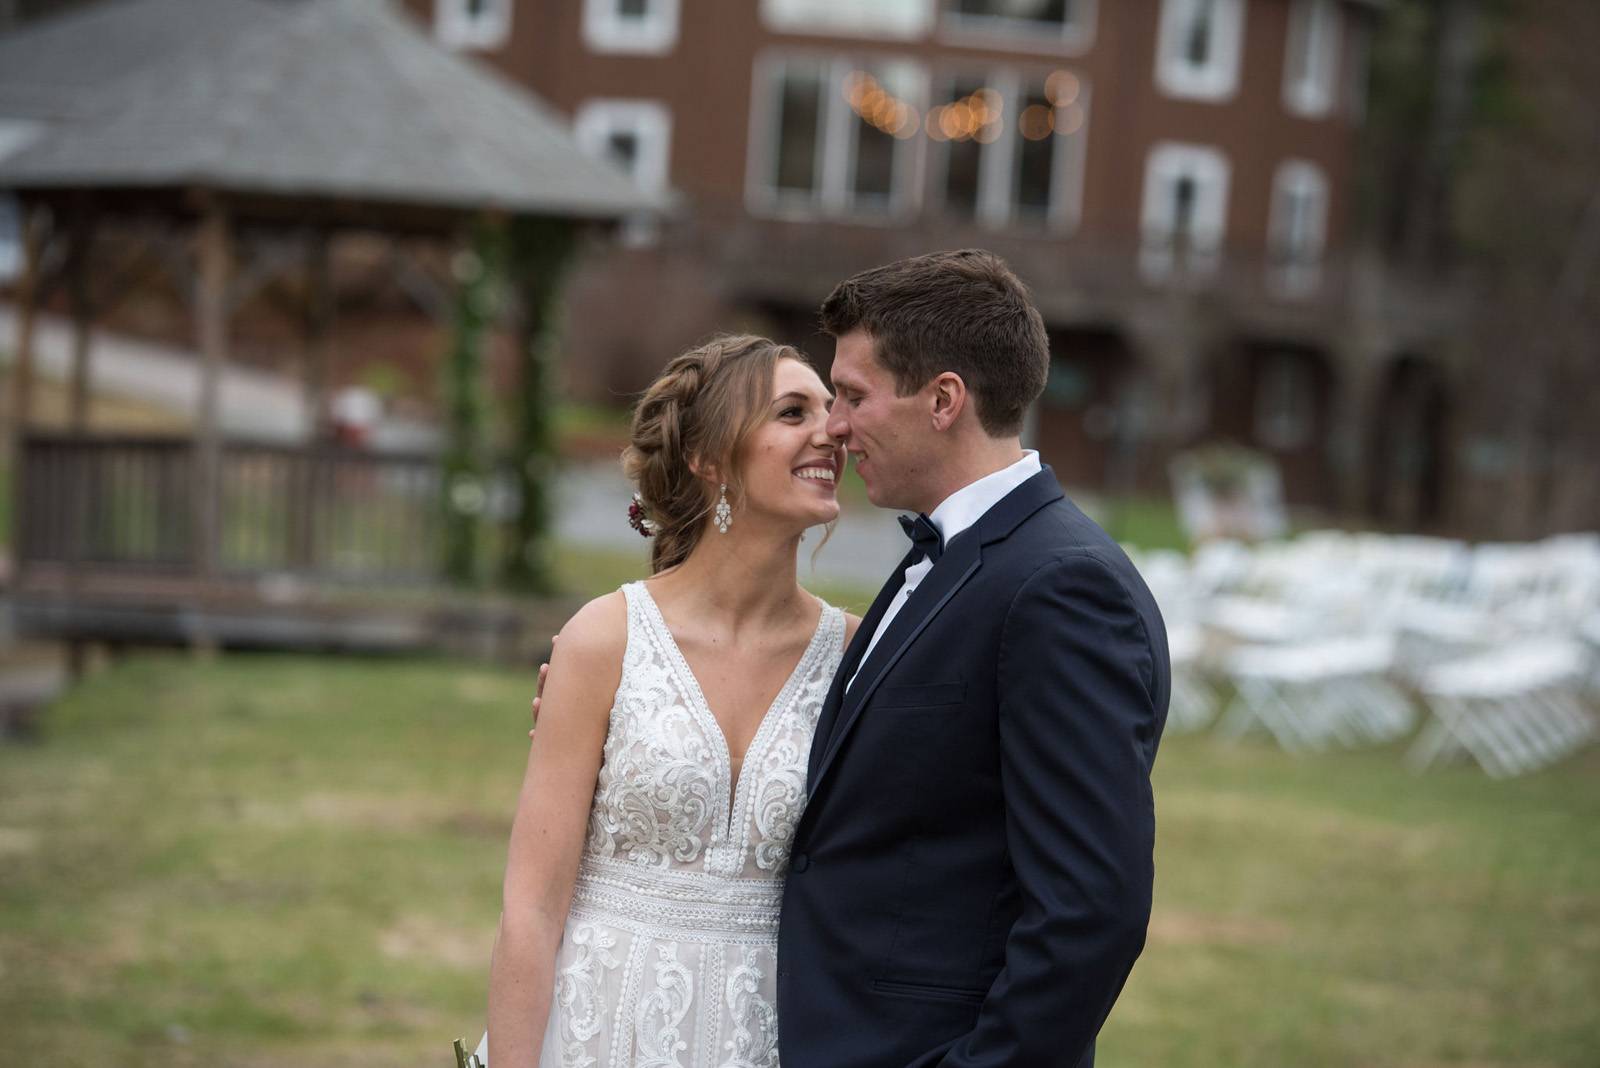 Happy bride and groom at Sleepy Hollow on their wedding day